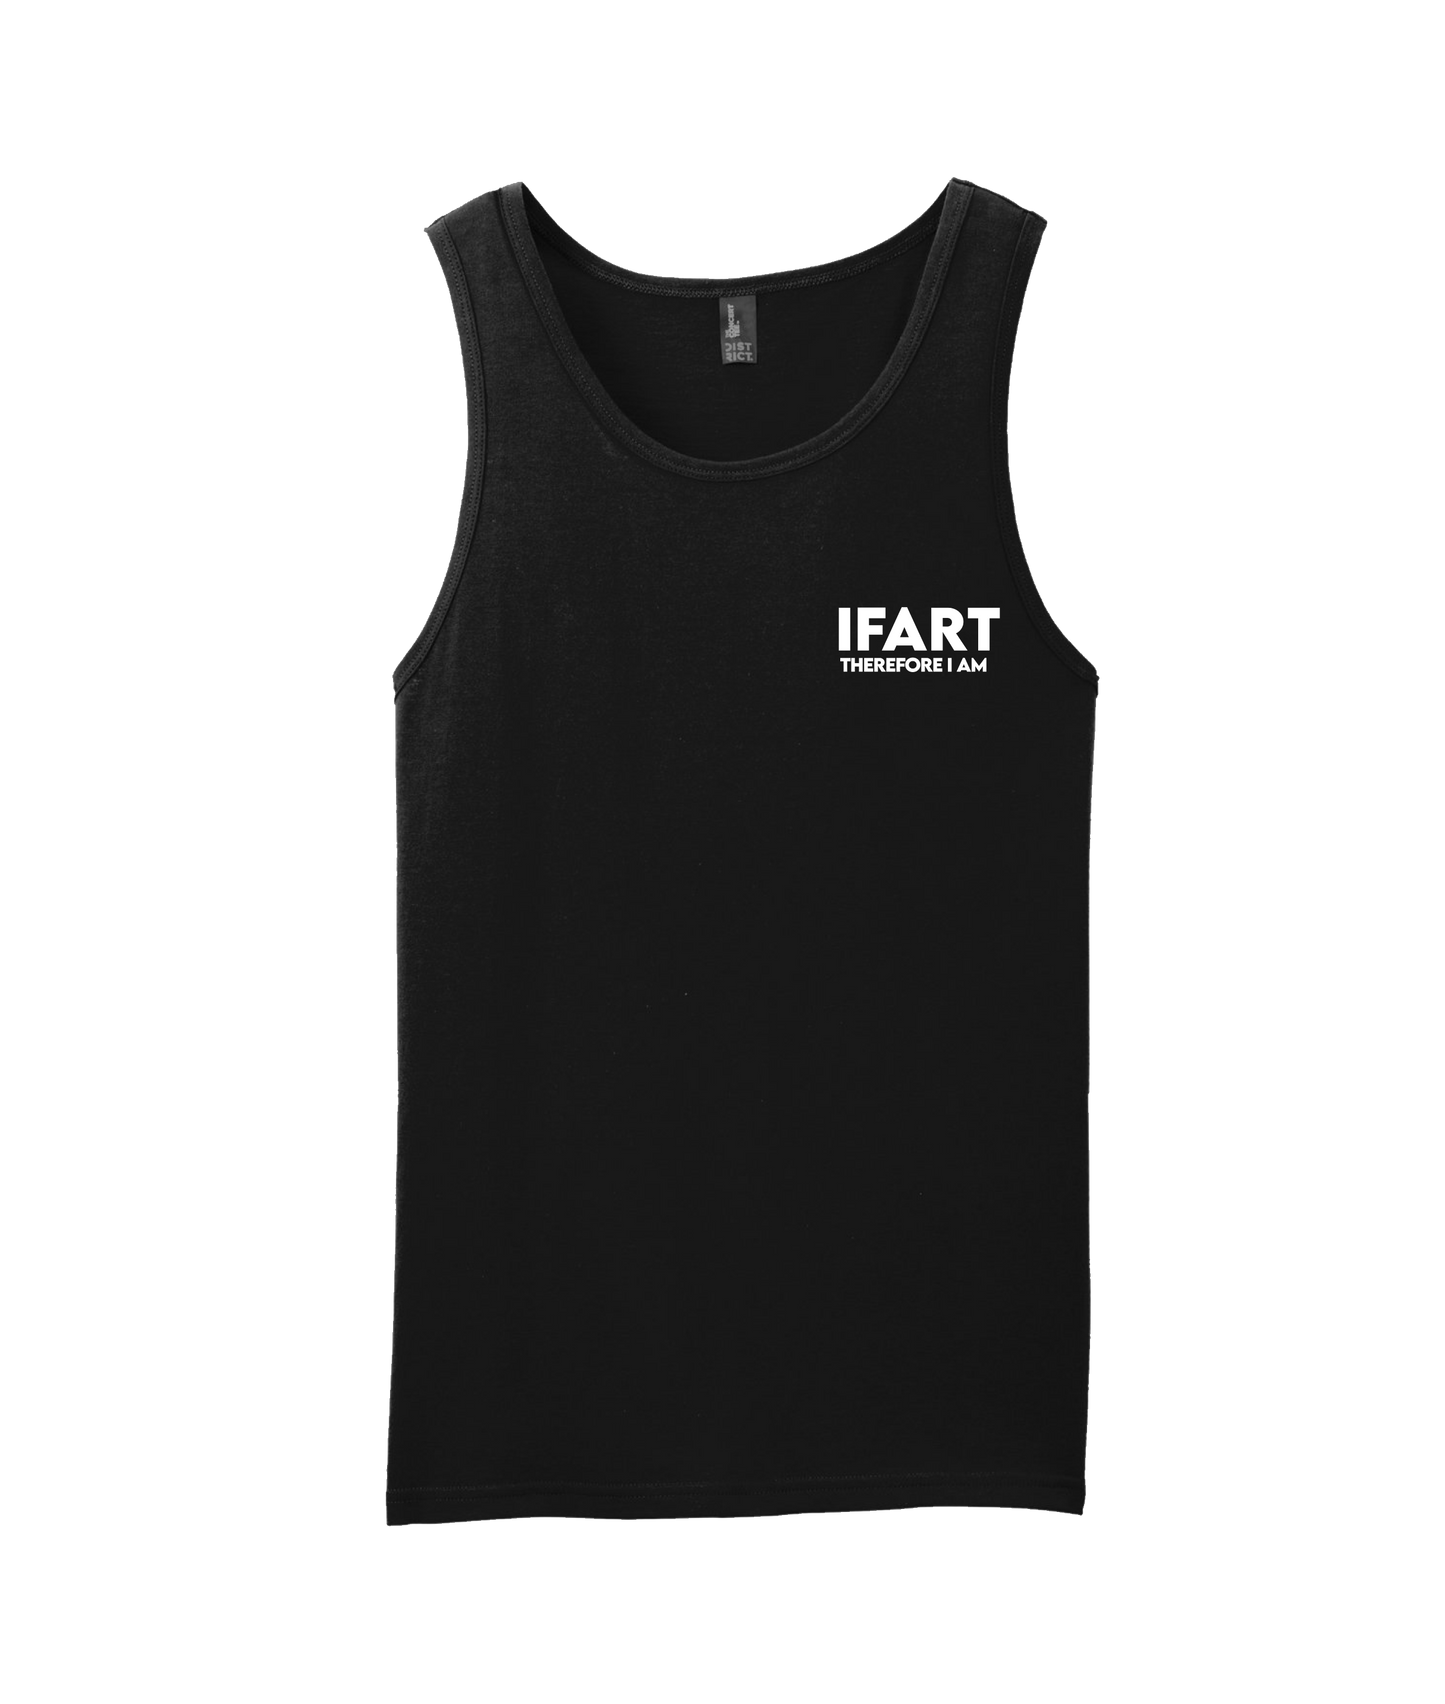 iFart - THEREFORE I AM - Black Tank Top